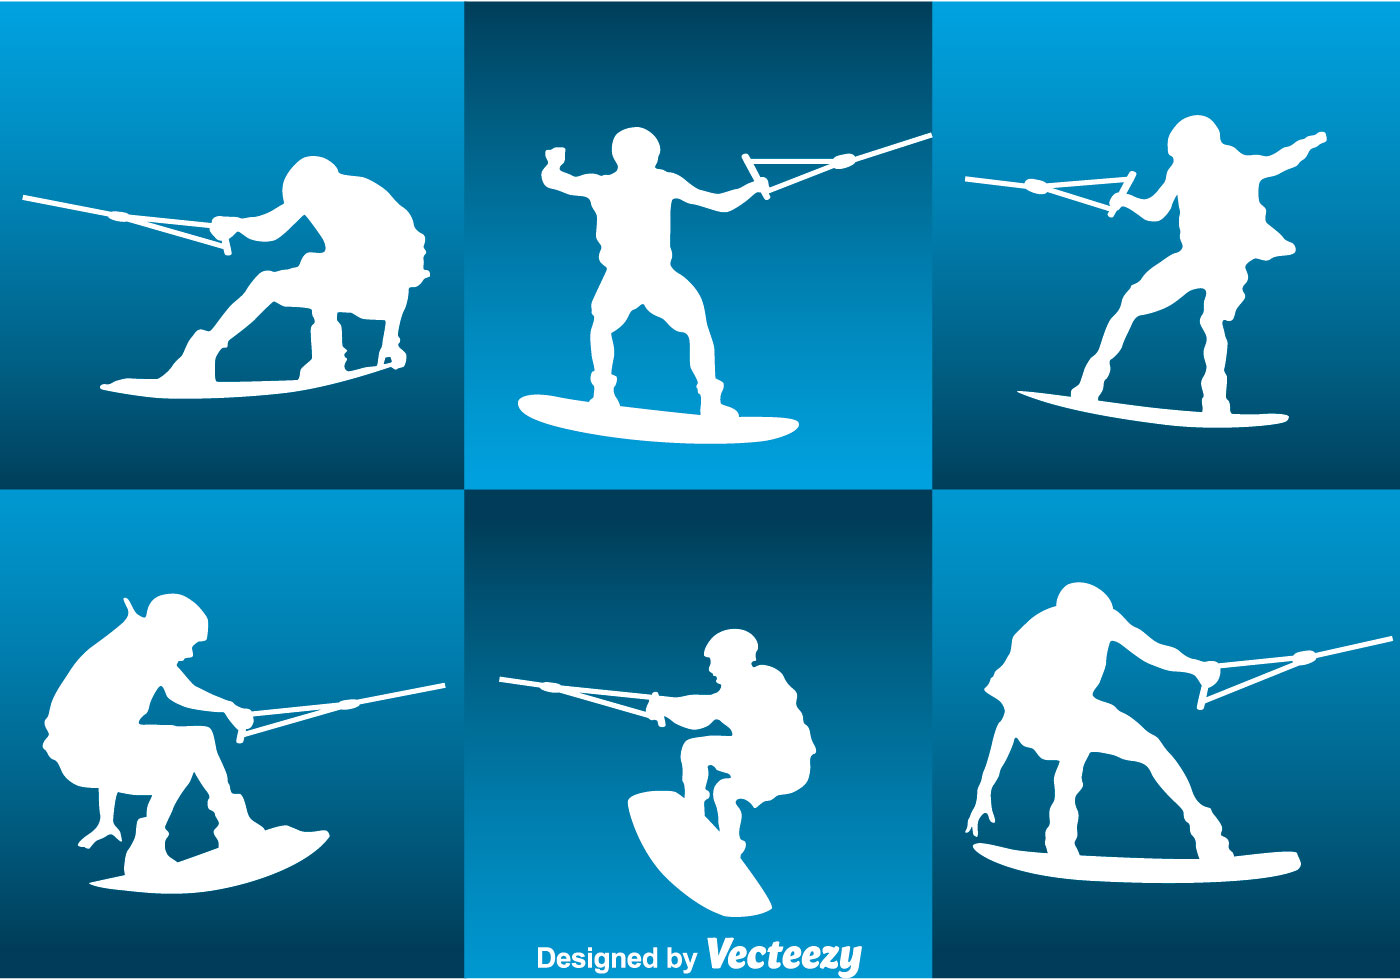 Download the Water Skiing Silhouette Vector Set 127706